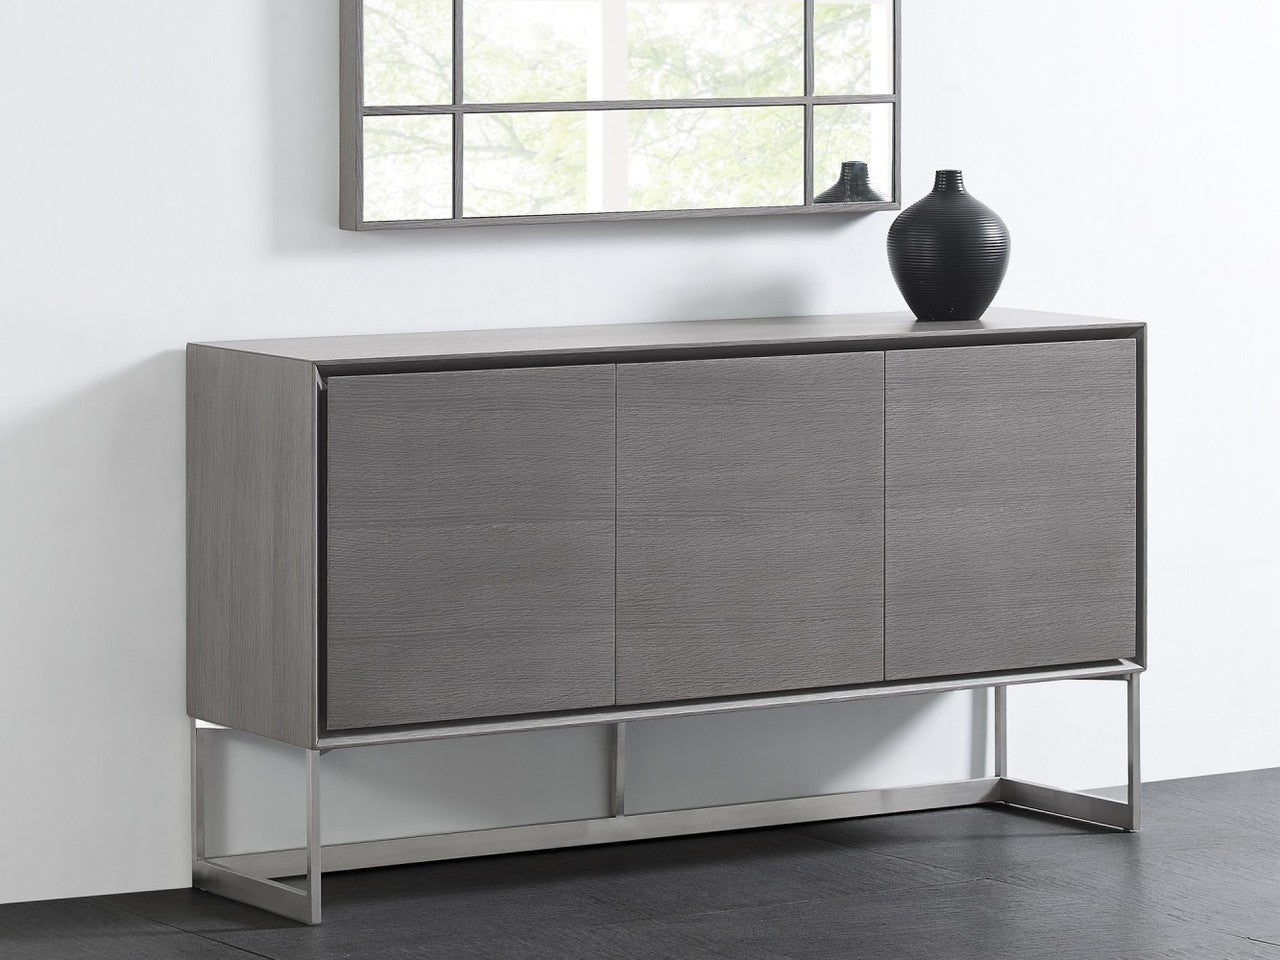 Fiona Buffet Table Grey by Whiteline